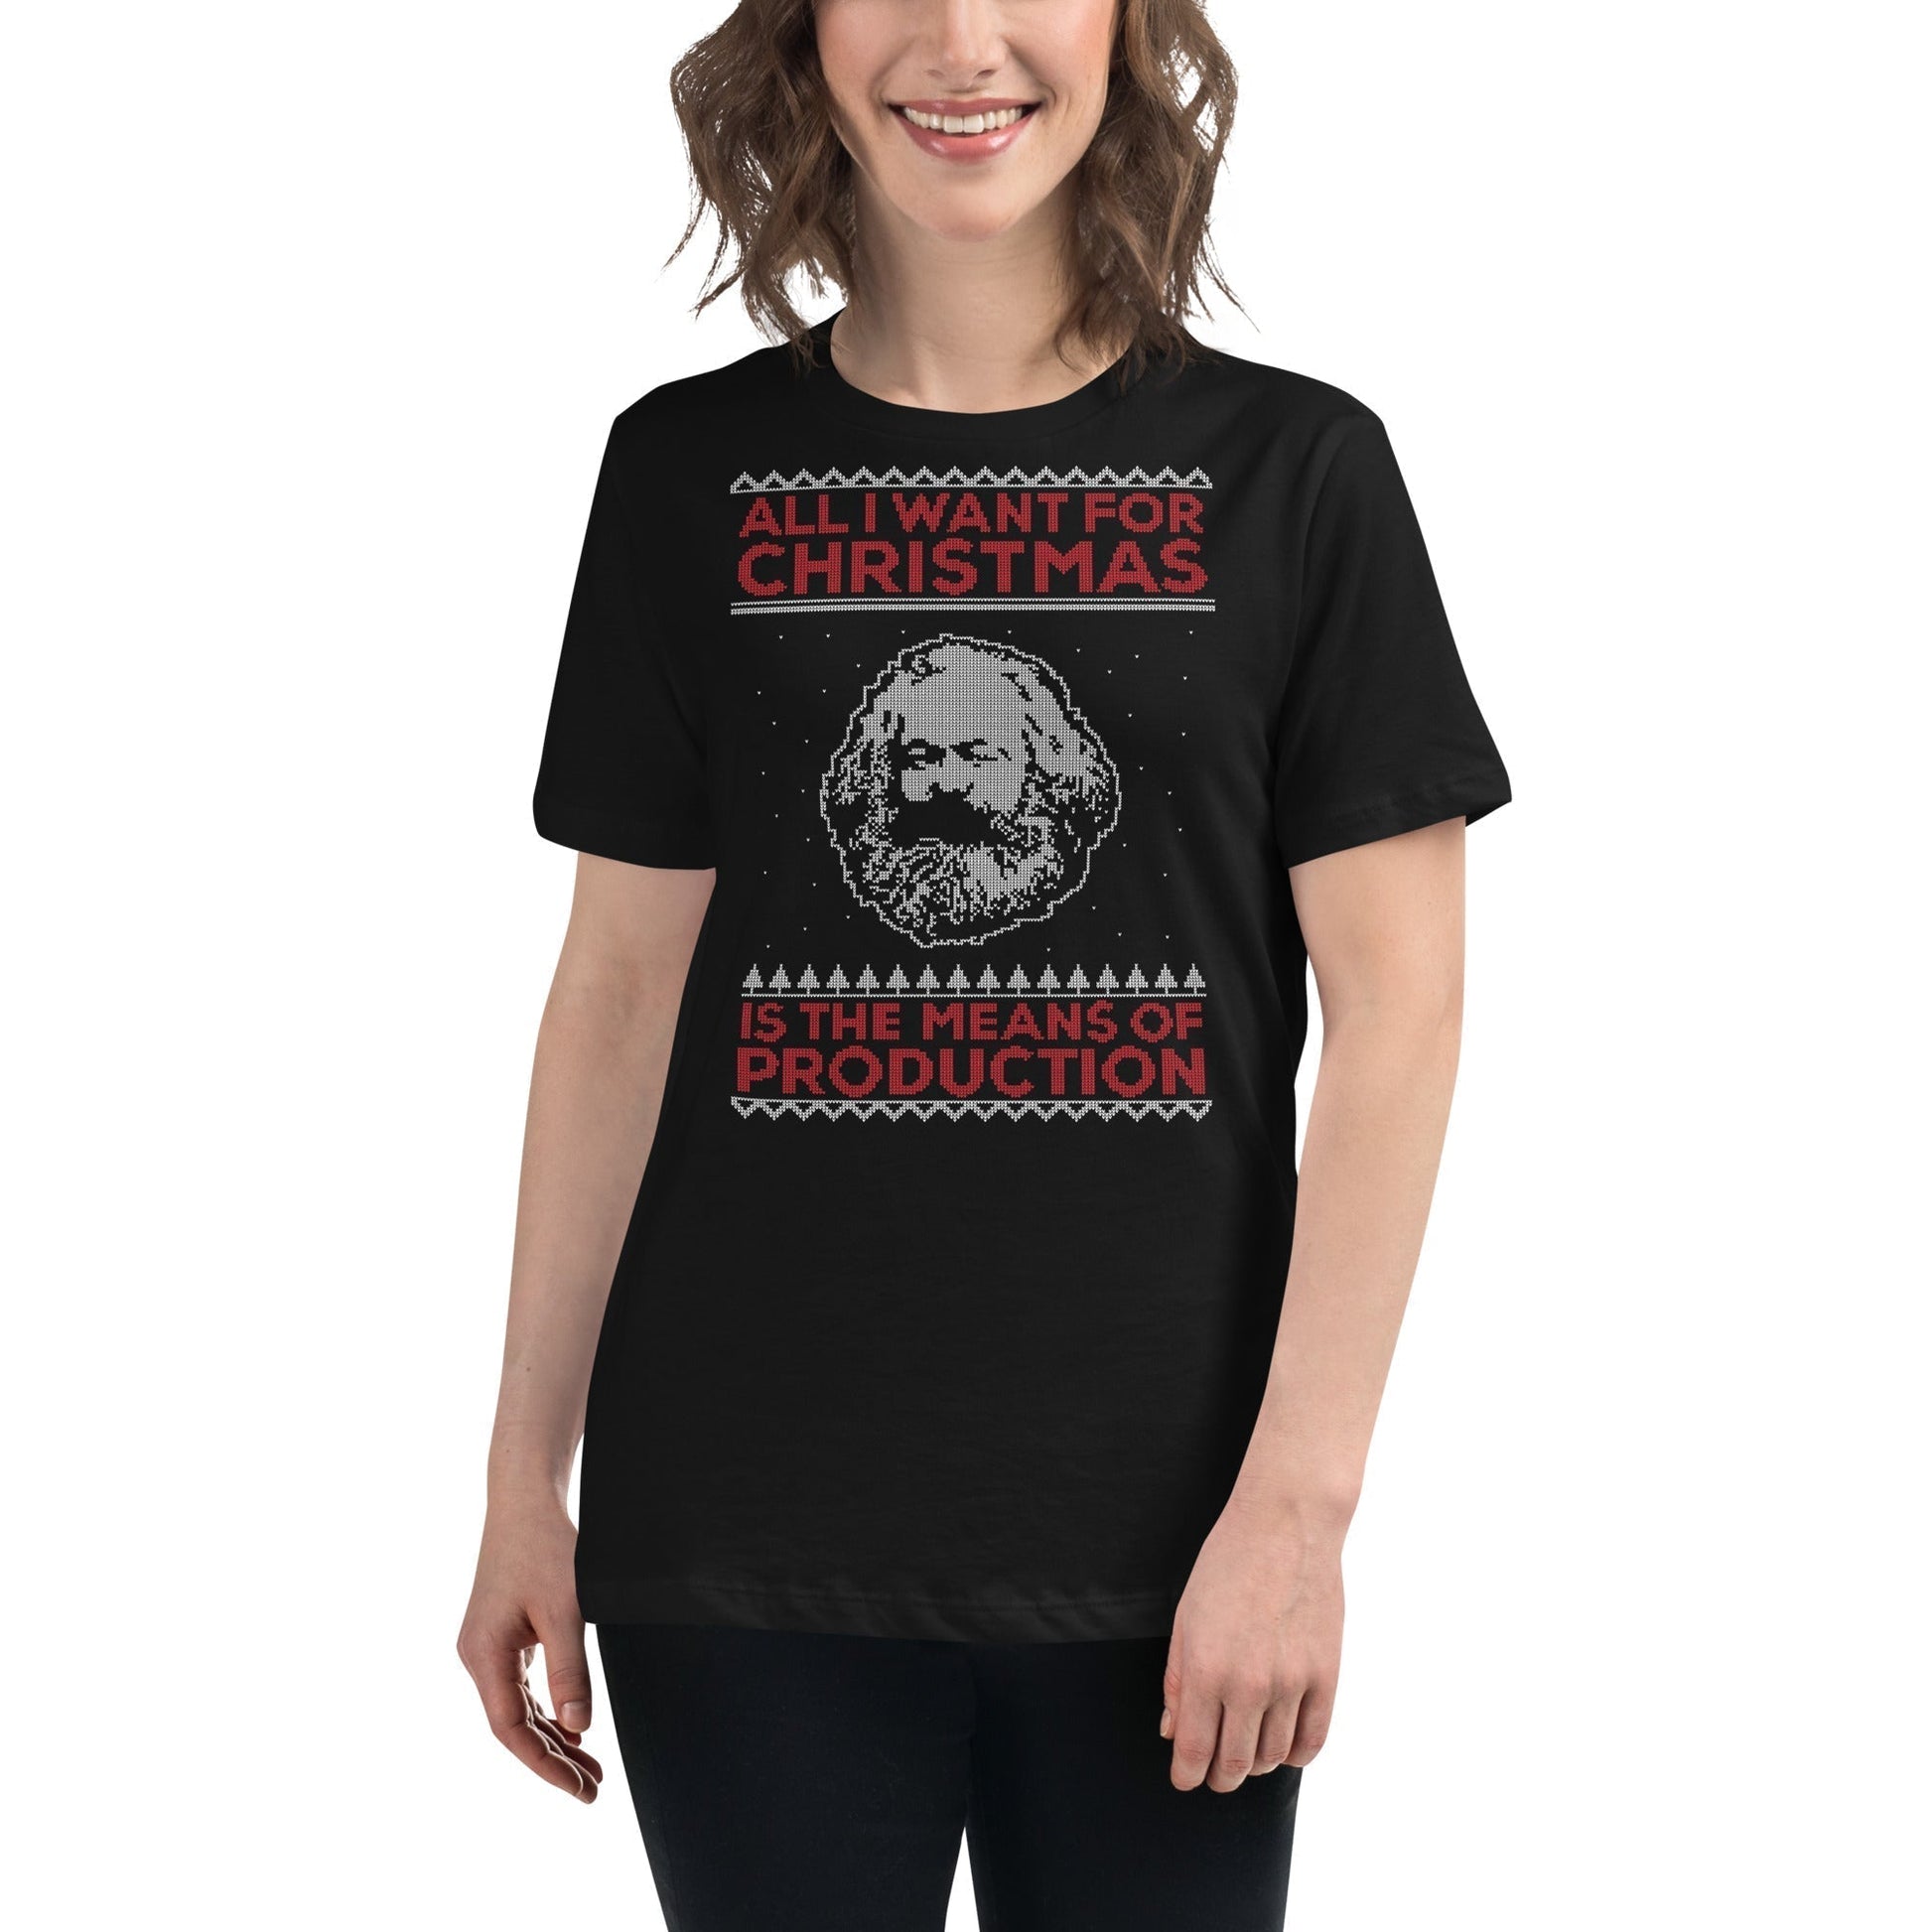 Marx - All I Want For Christmas - Women's T-Shirt